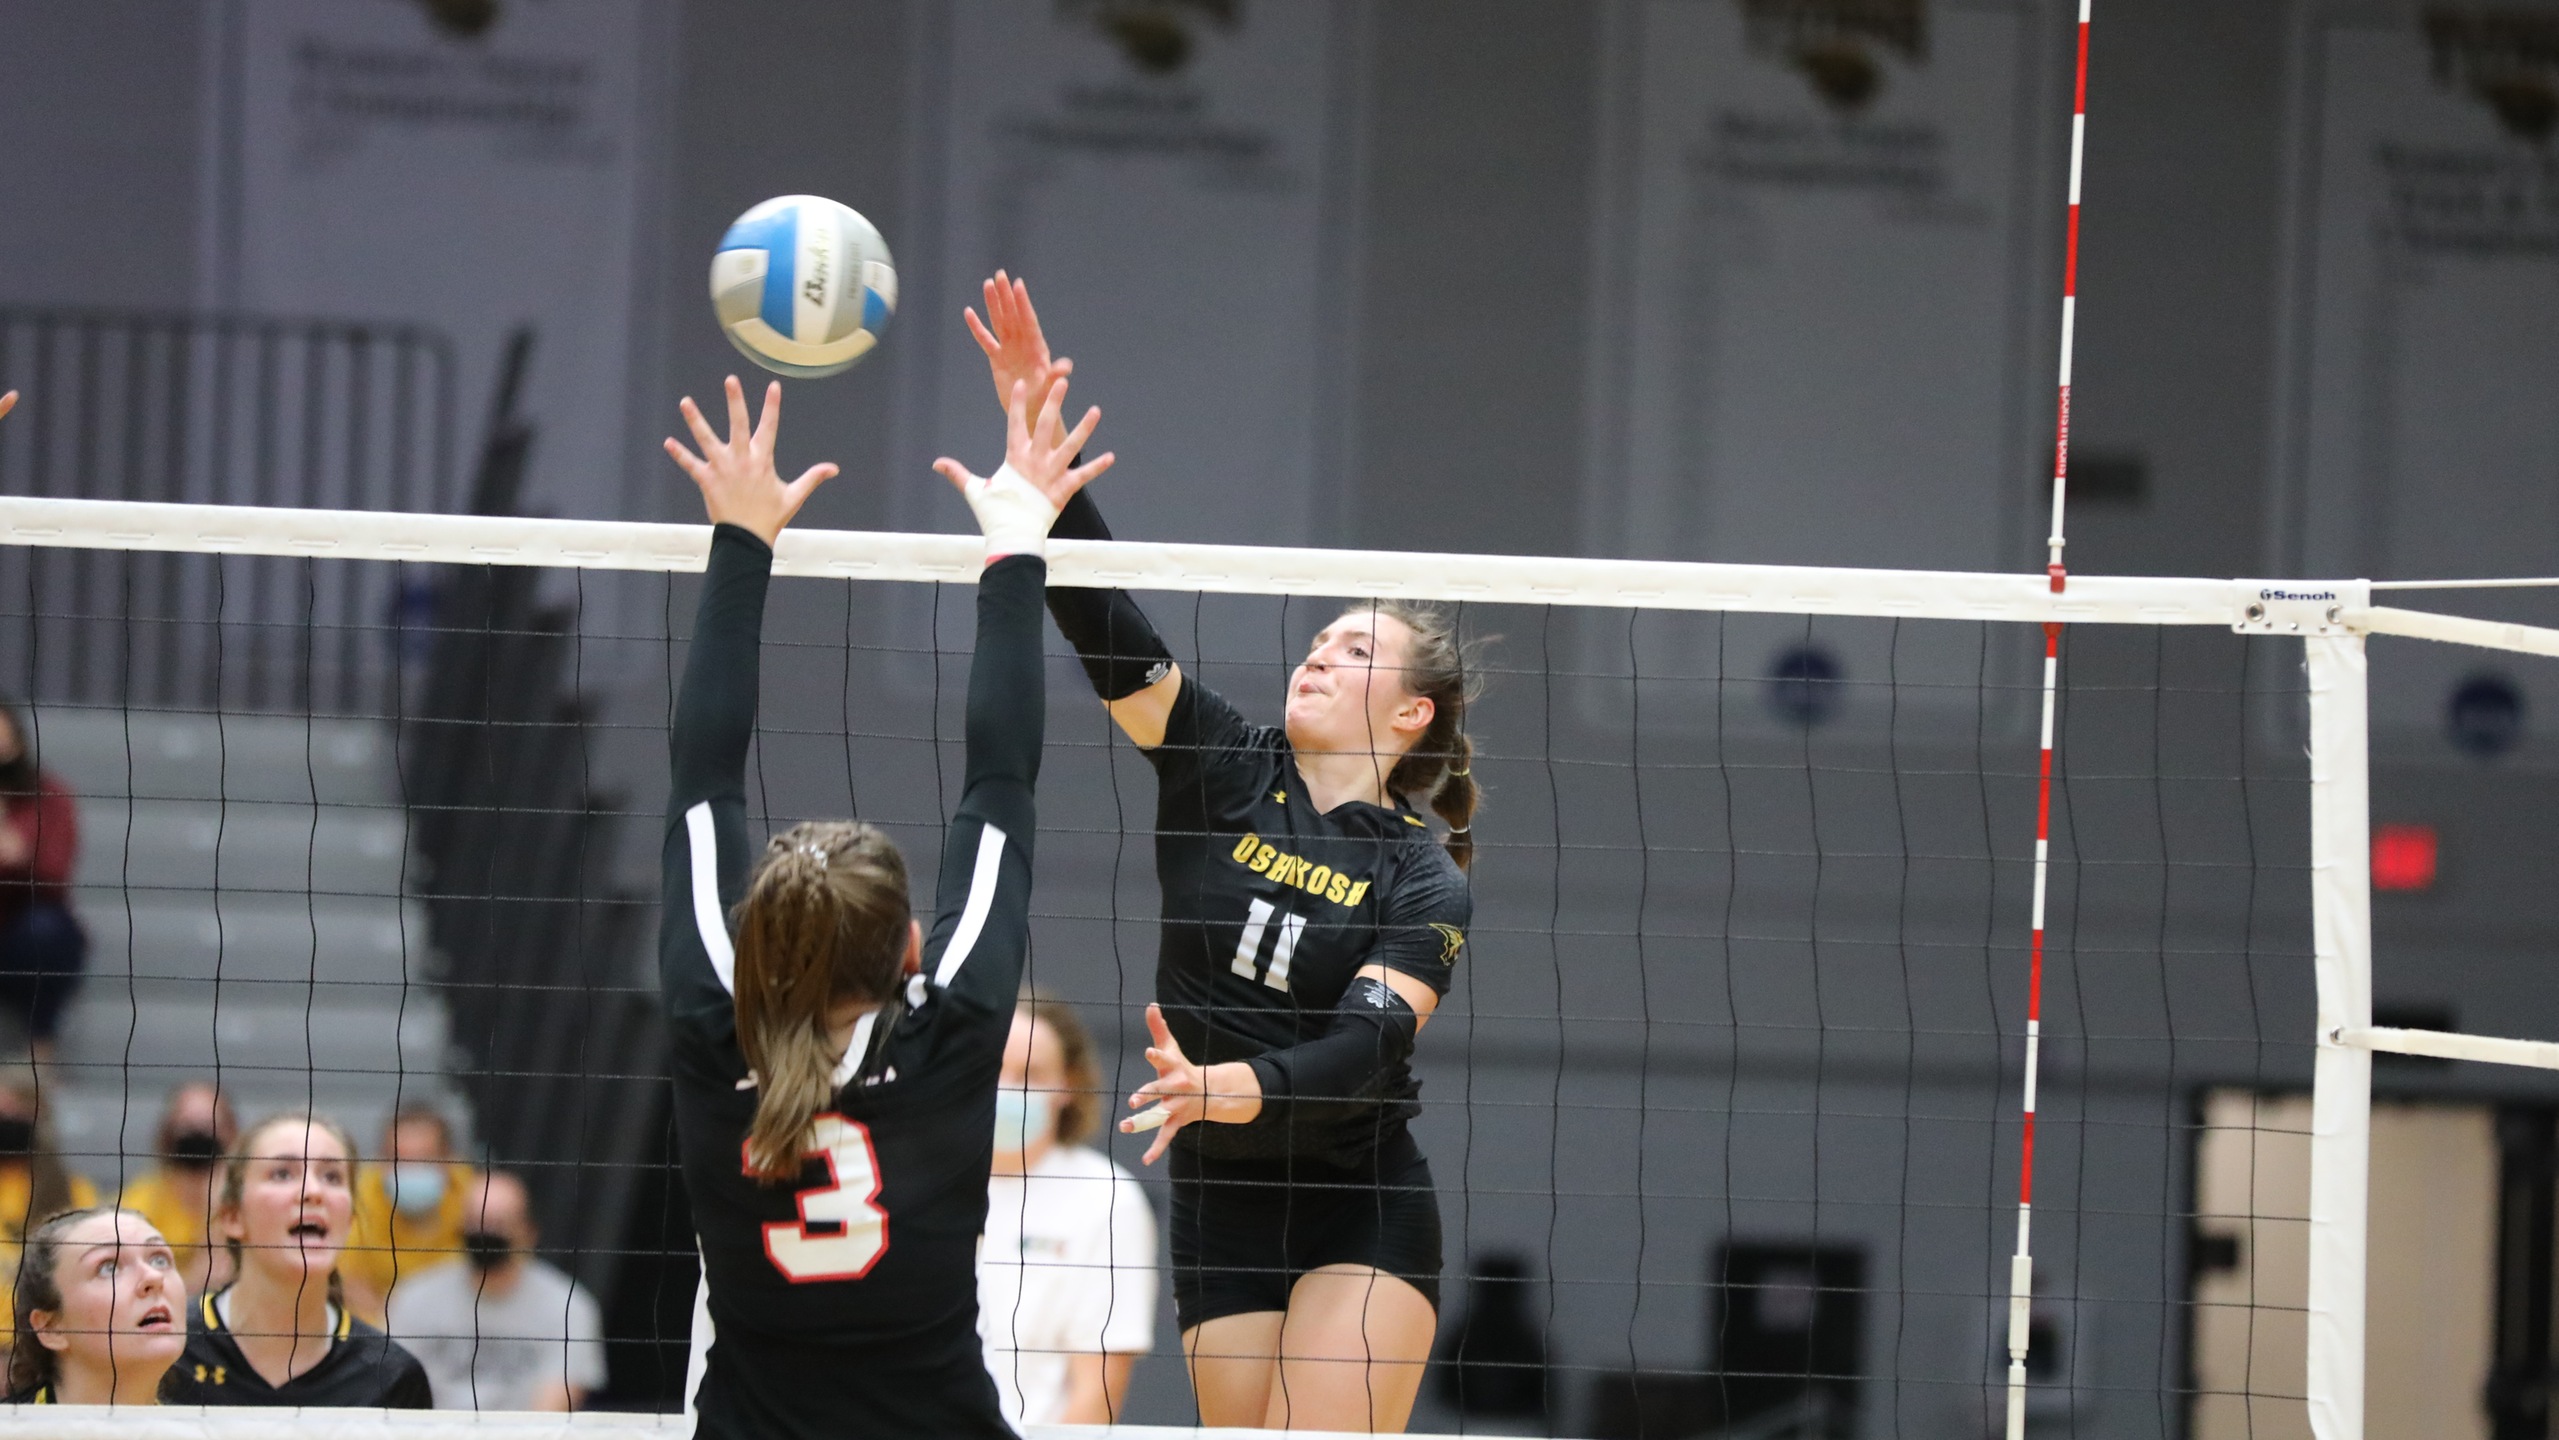 Riley Kindt hit .429 with 21 kills during UW-Oshkosh wins over Edgewood and Wisconsin Lutheran colleges on Saturday.